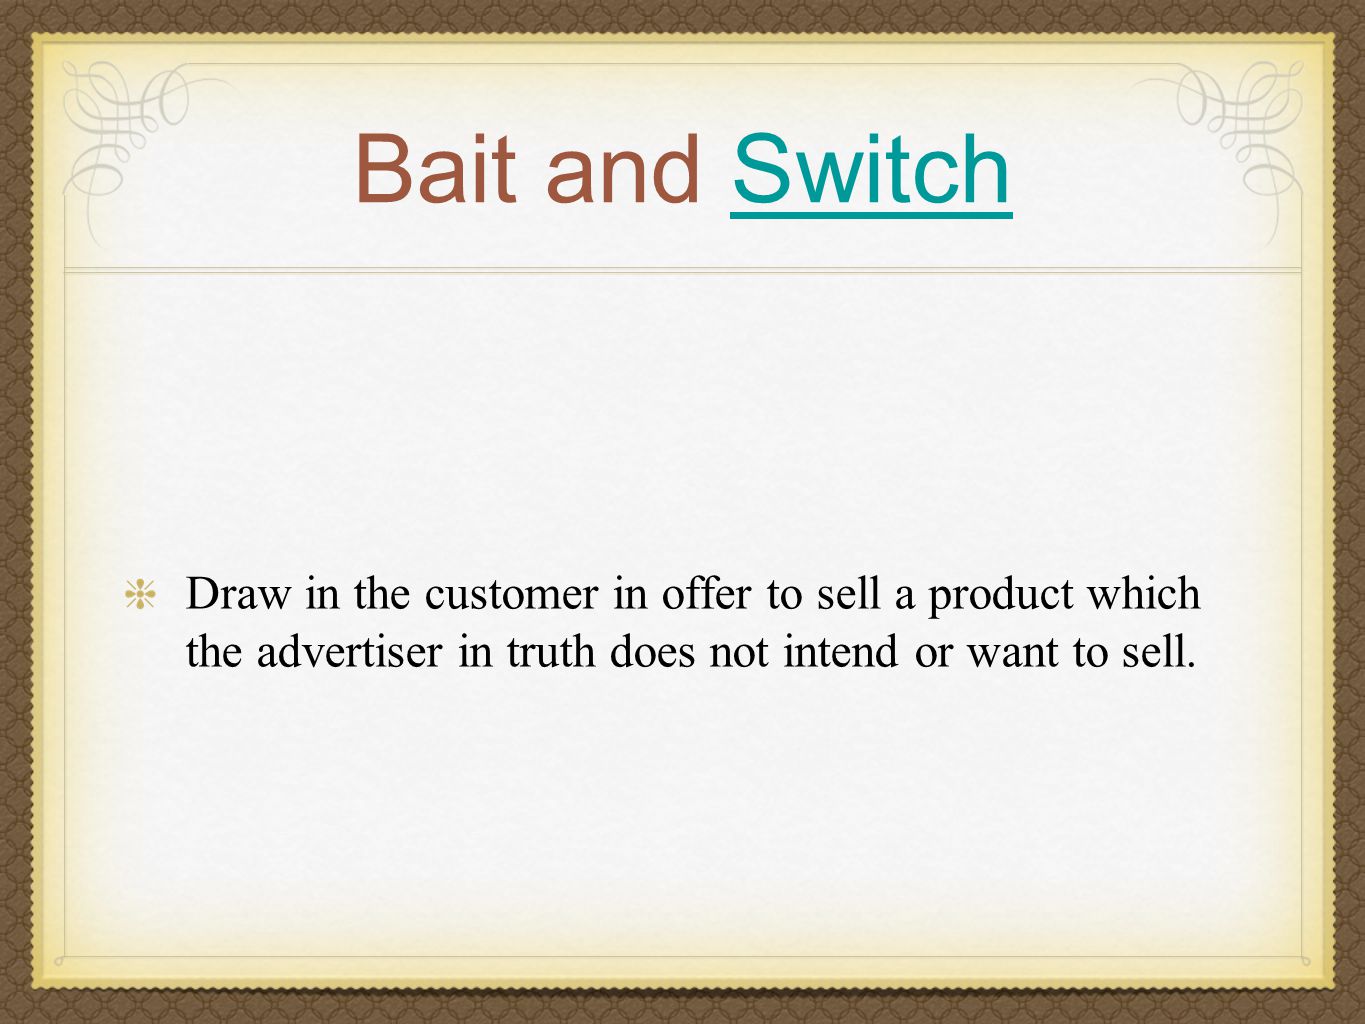 Bait and SwitchSwitch Draw in the customer in offer to sell a product which the advertiser in truth does not intend or want to sell.